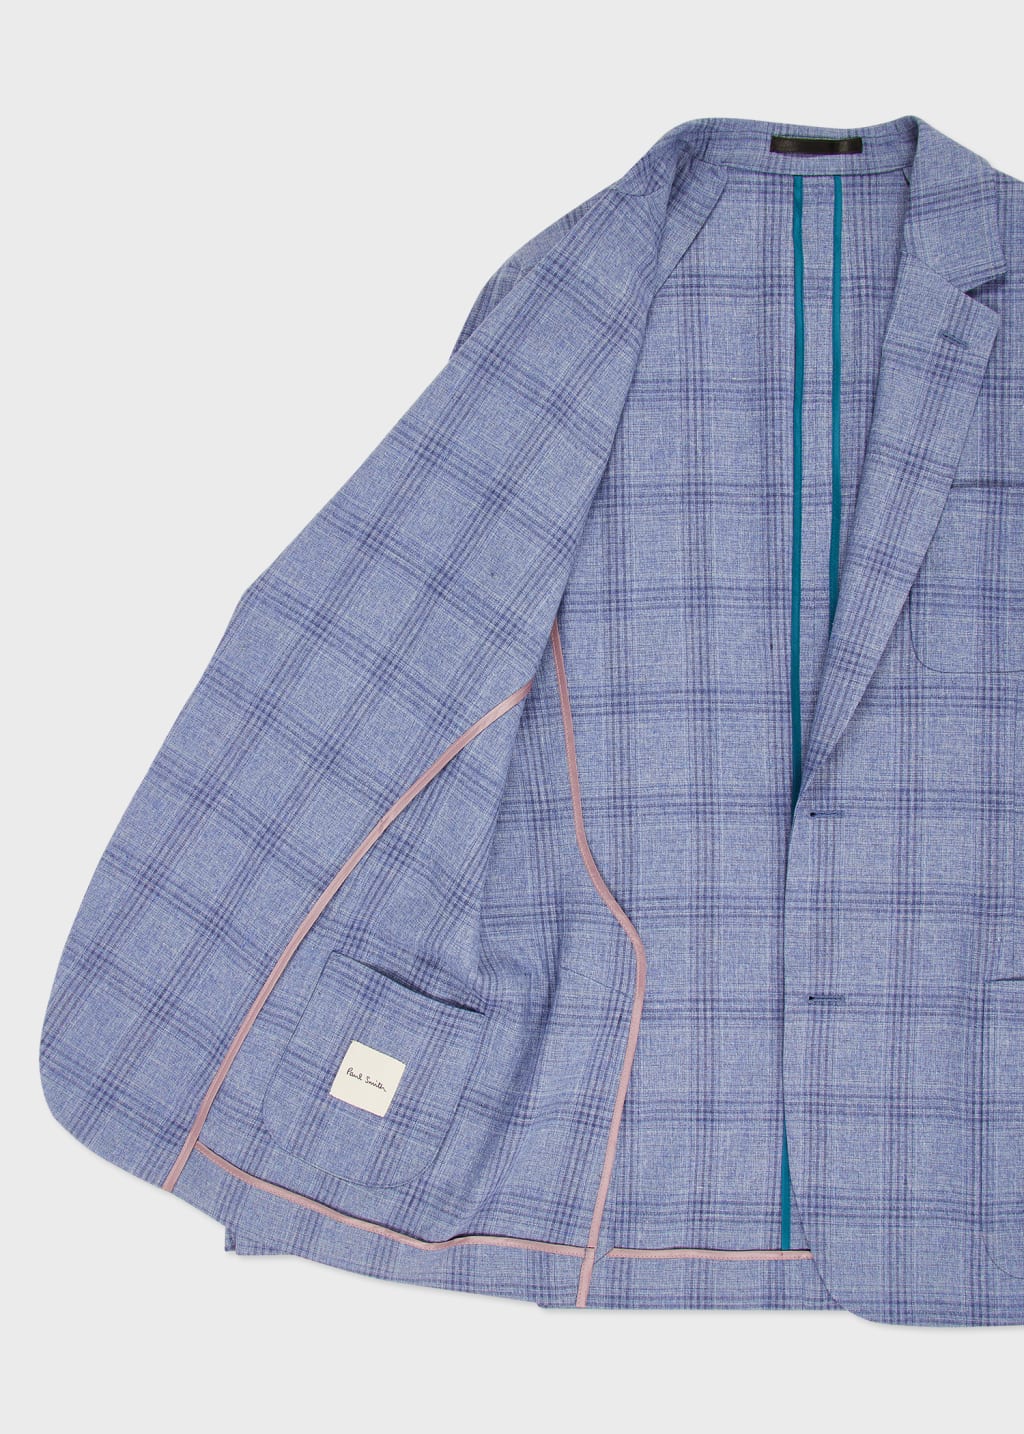 Product view  Sky Blue Cotton-Linen Check Unlined Blazer Paul Smith